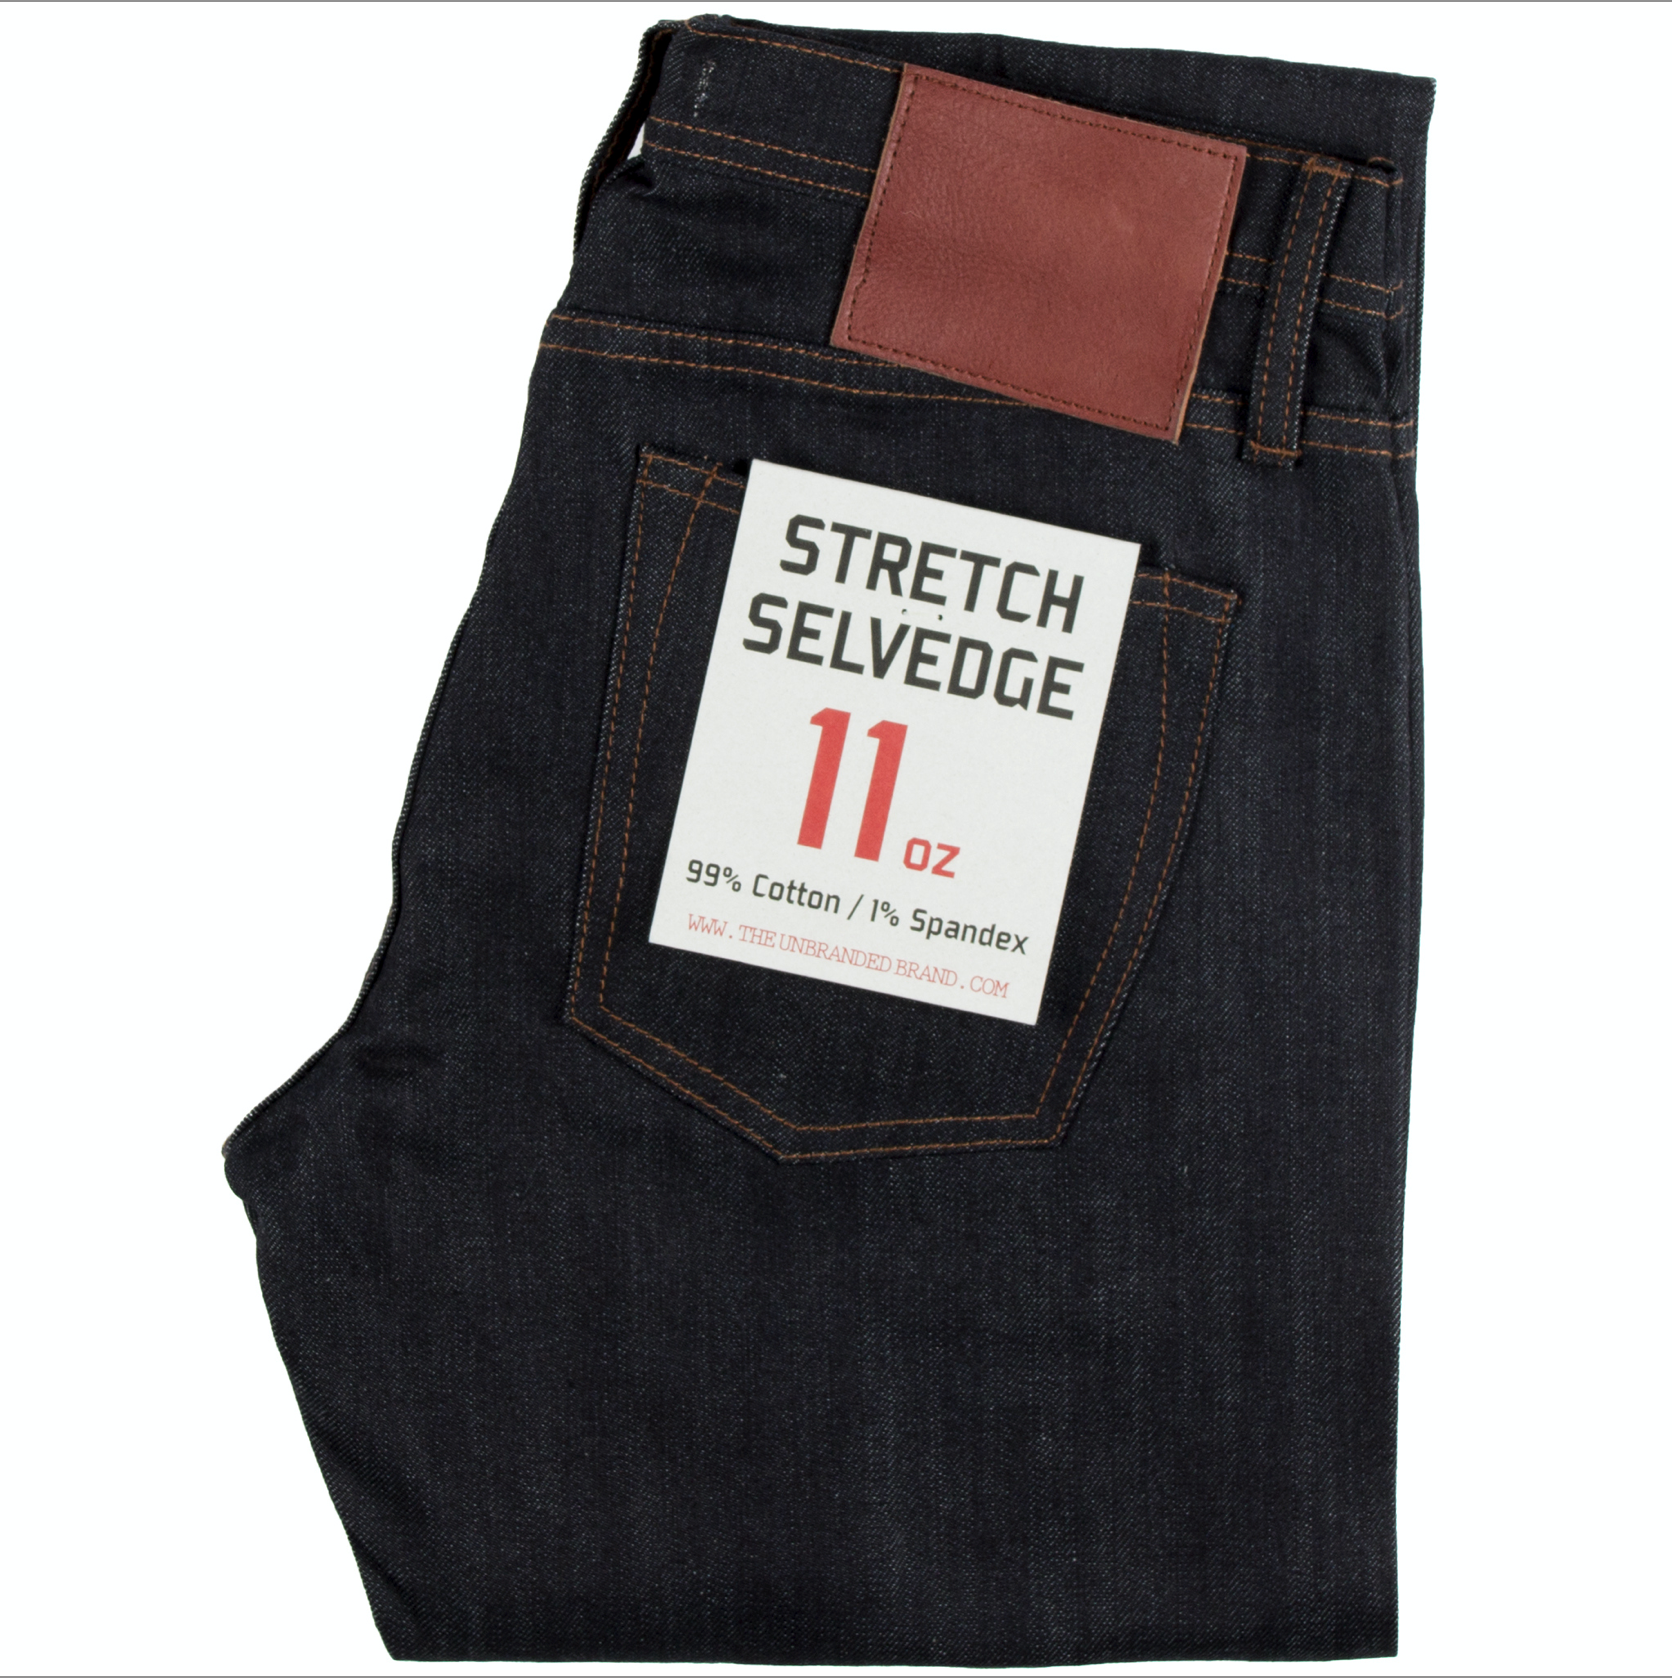 THE UNBRANDED BRAND UB243 TAPERED FIT HEAVYWEIGHT NEPPY SELVEDGE